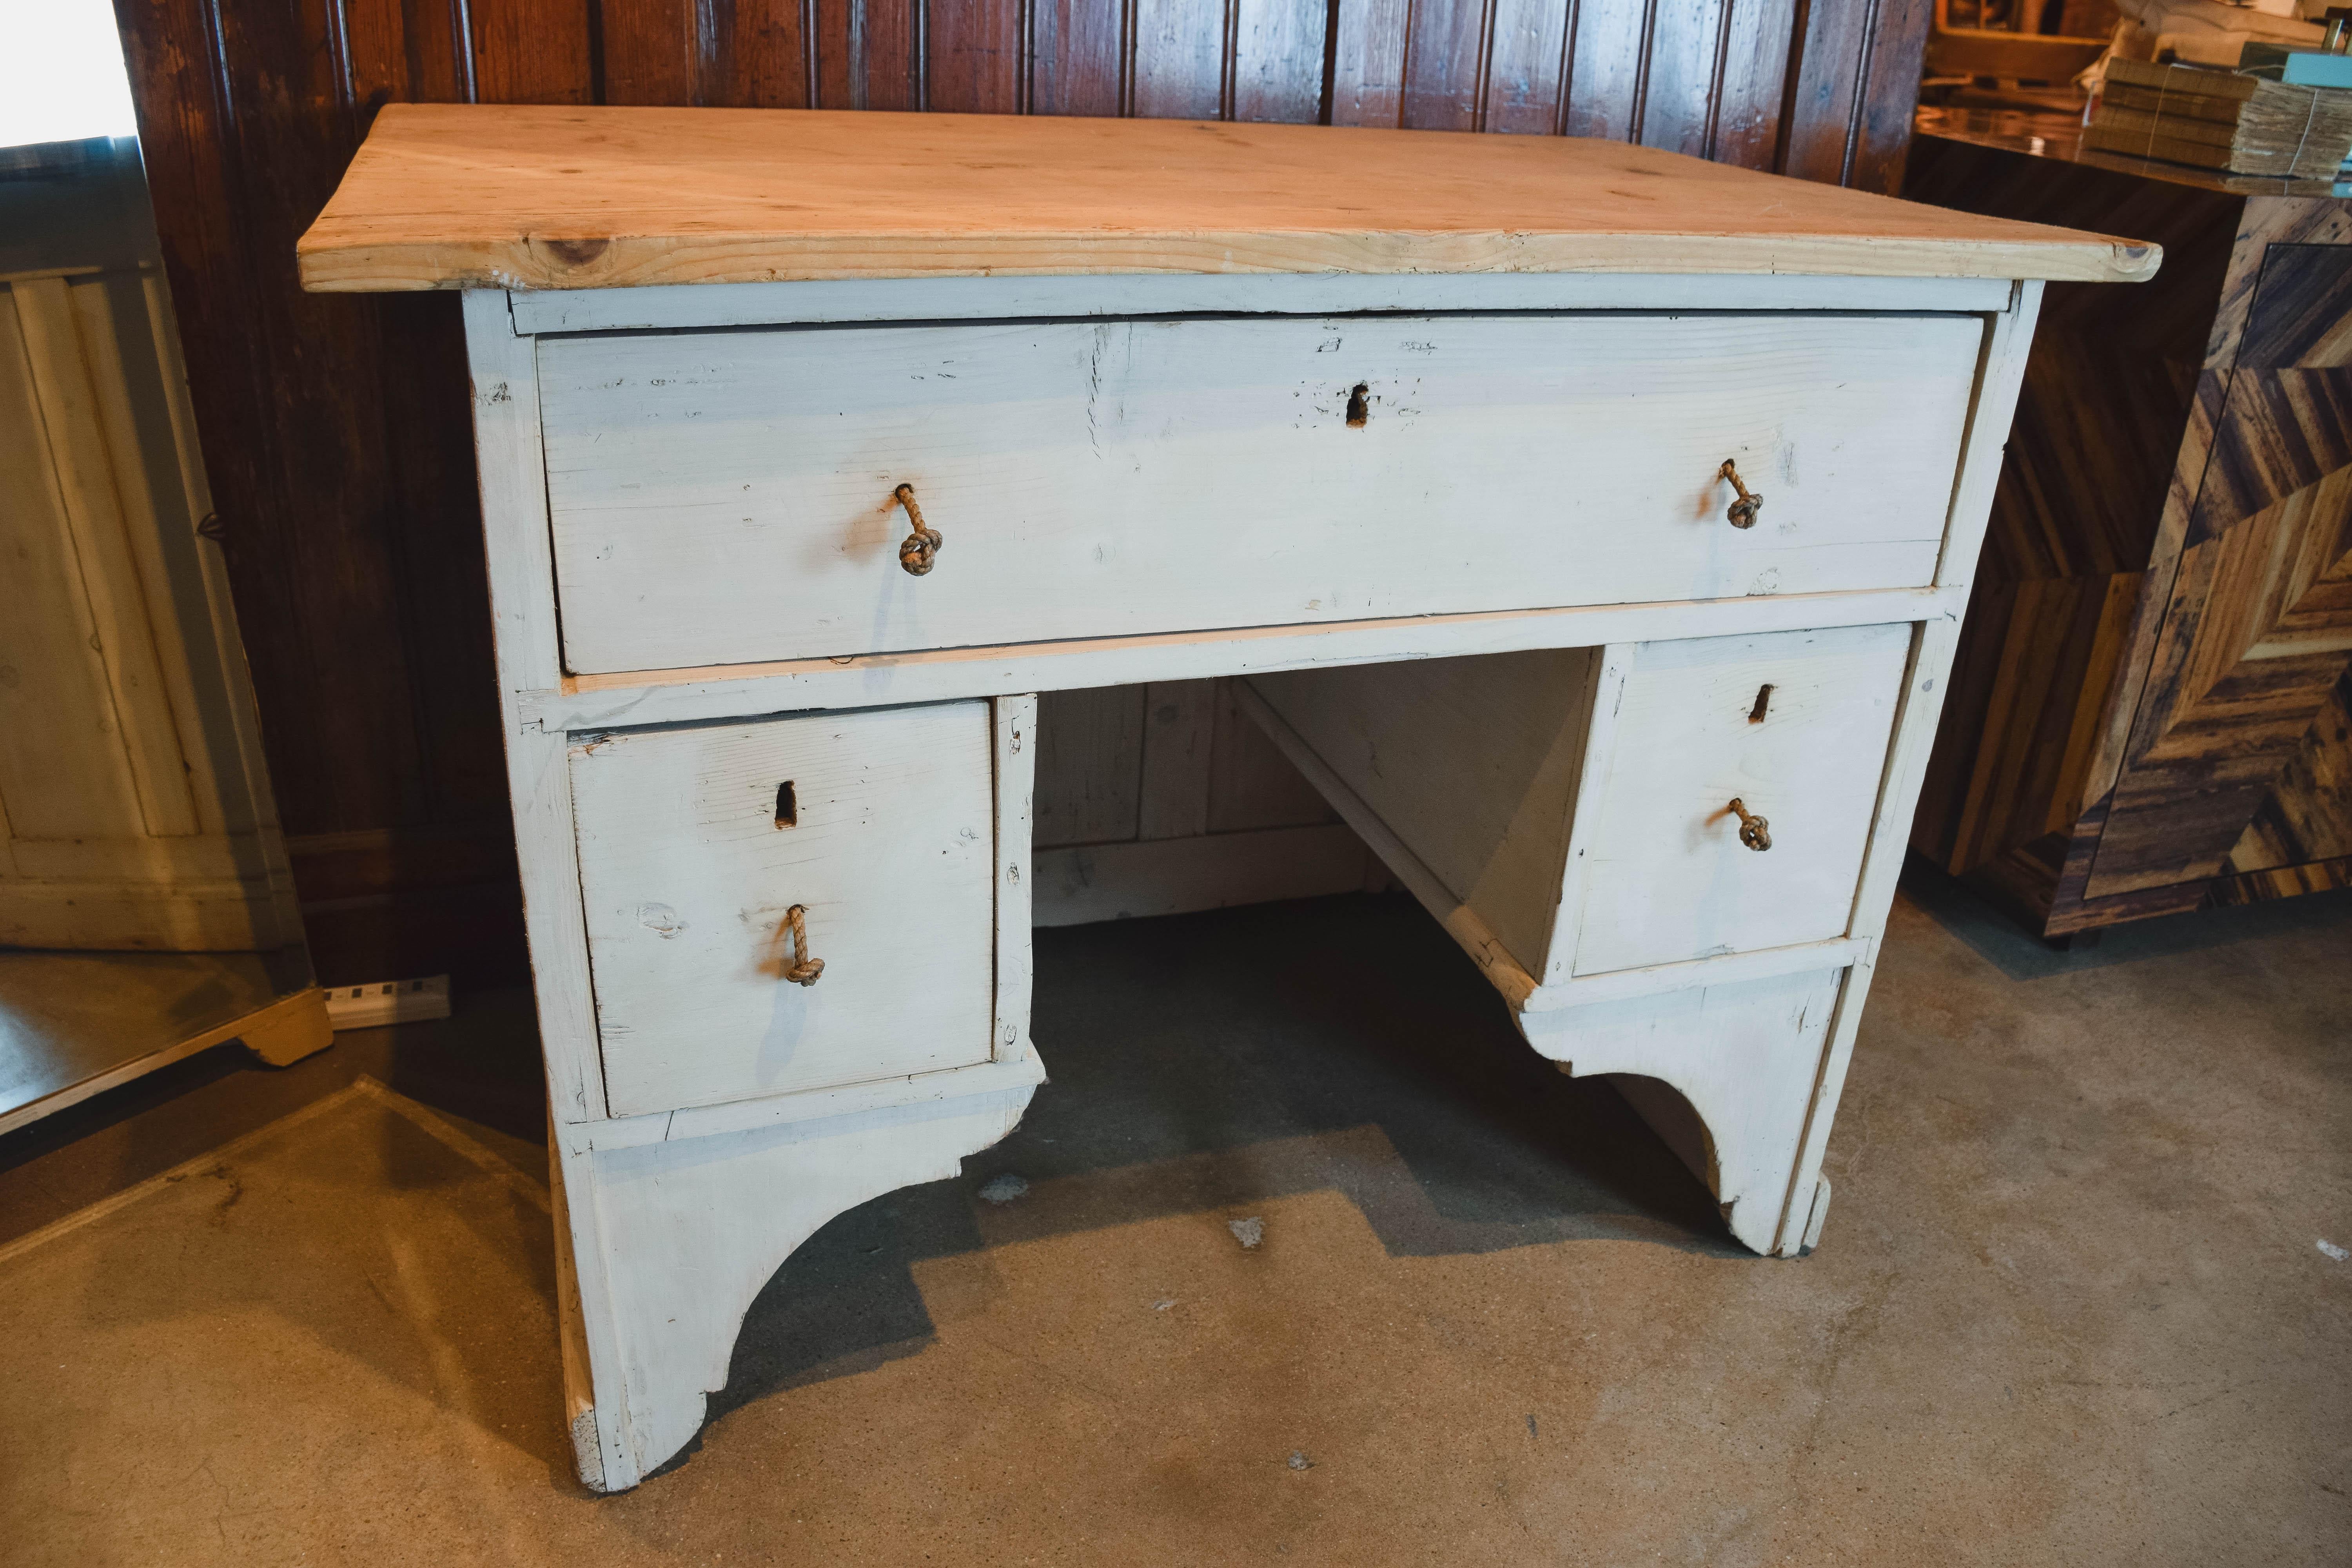 This wonderful antique shop counter/desk has a light three plank pine top and an antique painted finish on the bottom. The counter, finished on all sides has one long drawer, divided into two compartments on the inside that spans the width of the